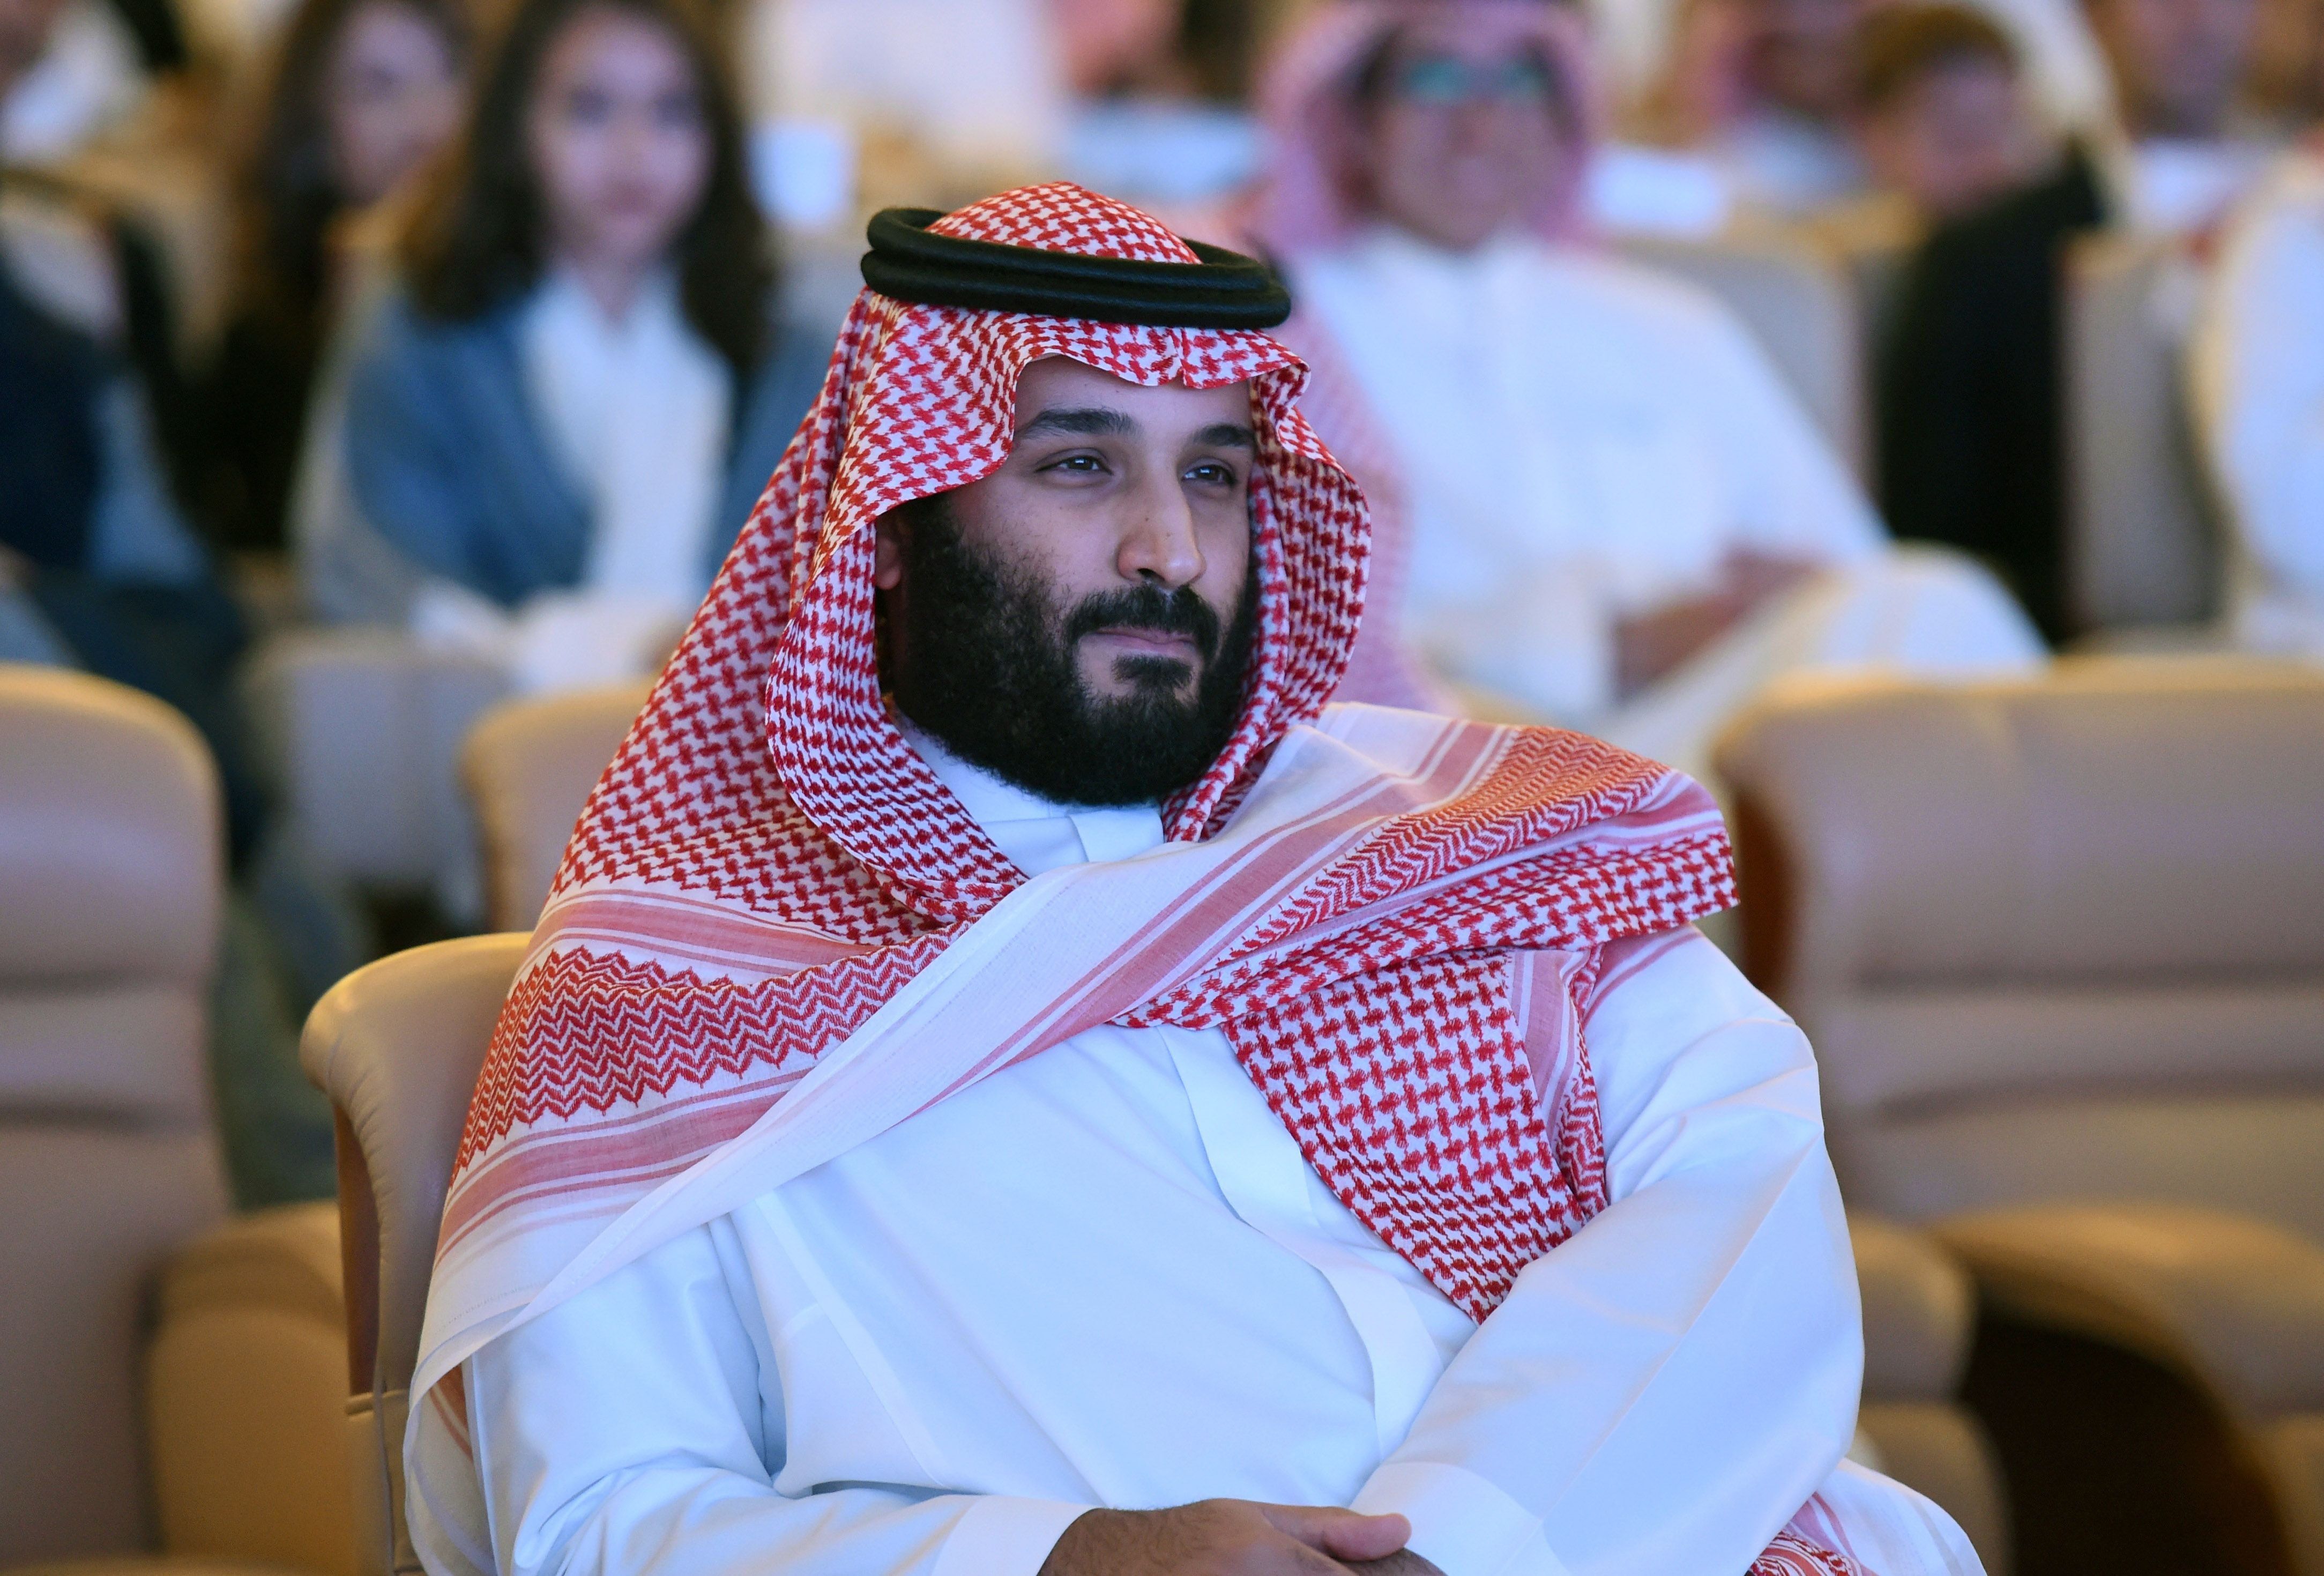 Up to 20 princes detained in latest power grab by Saudi crown prince